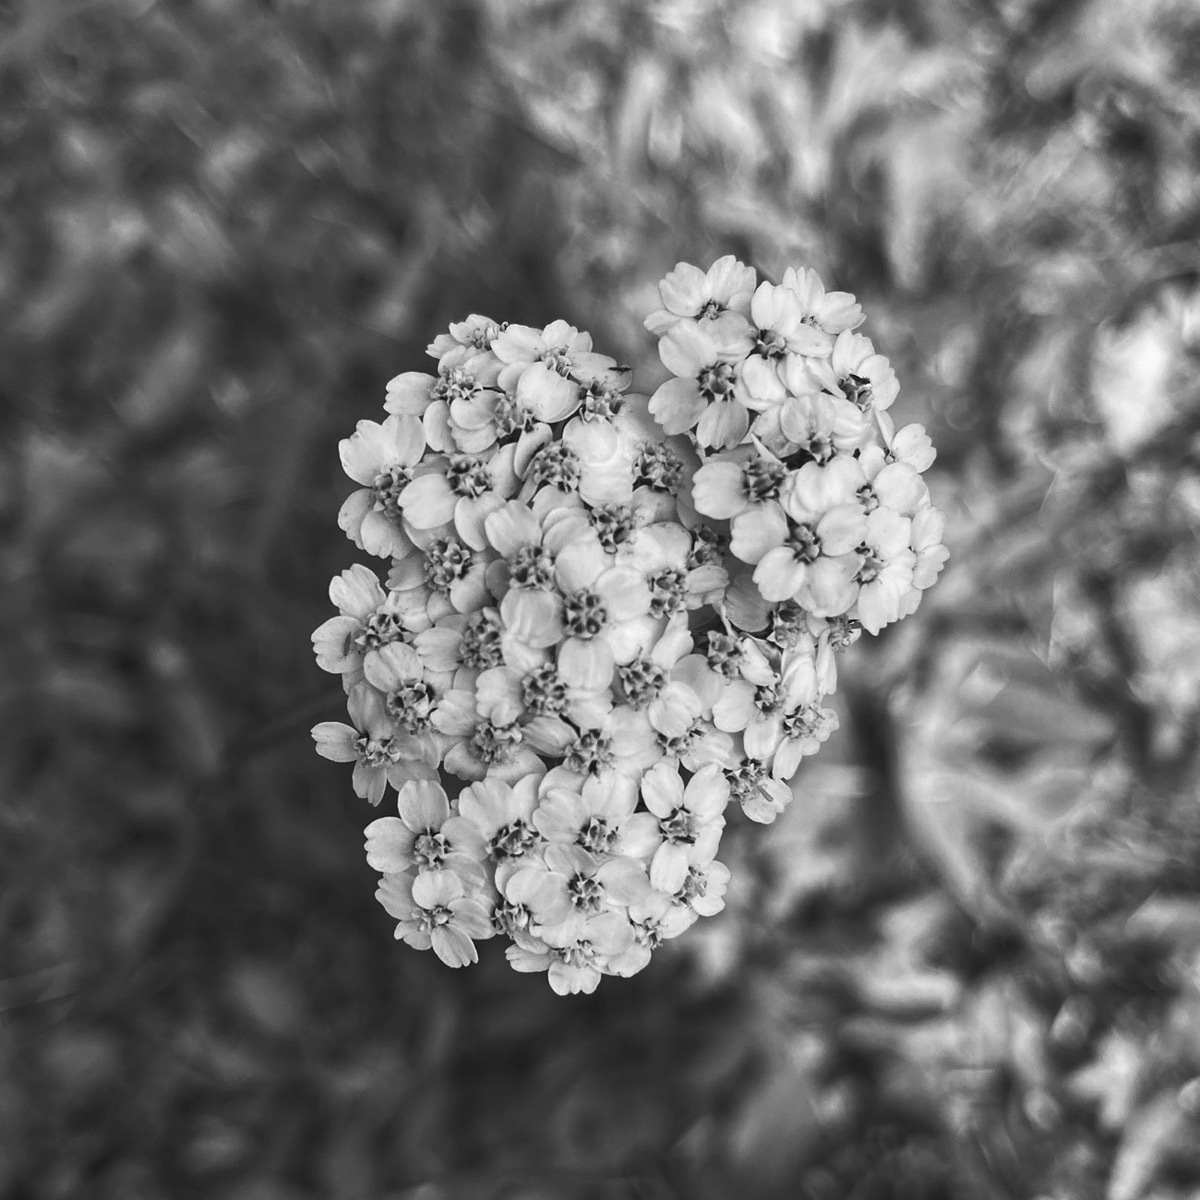 Black and white close up of small white yarrow flowers